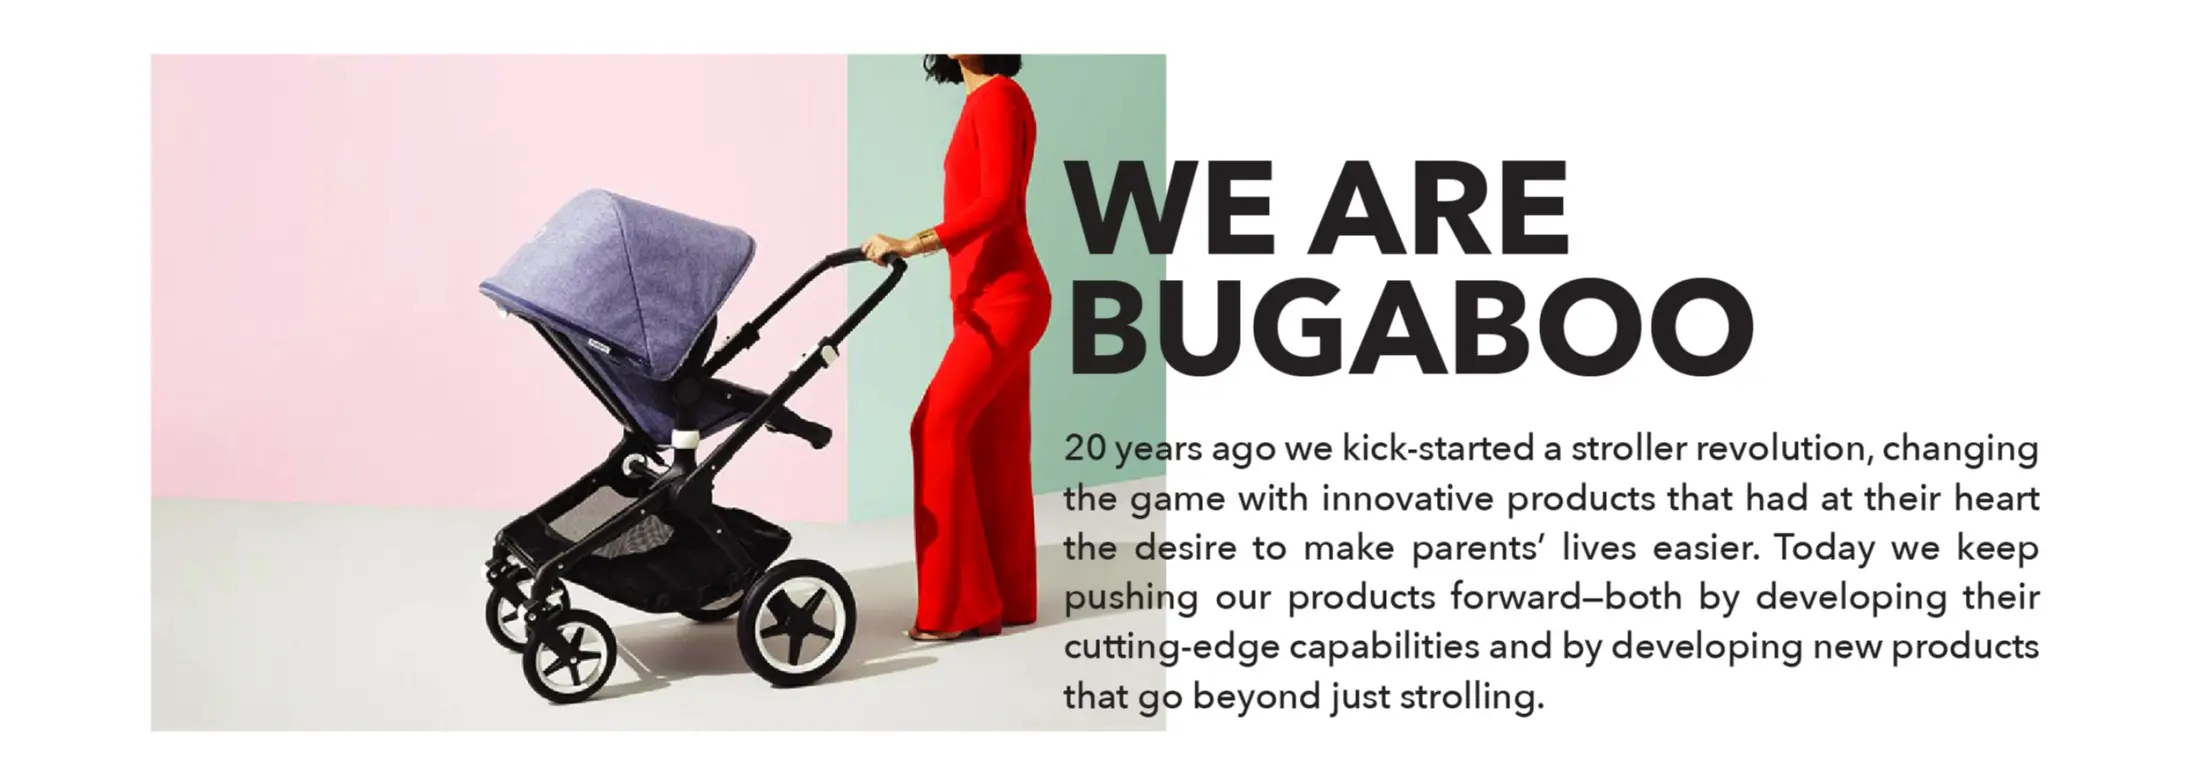 bugaboo official site